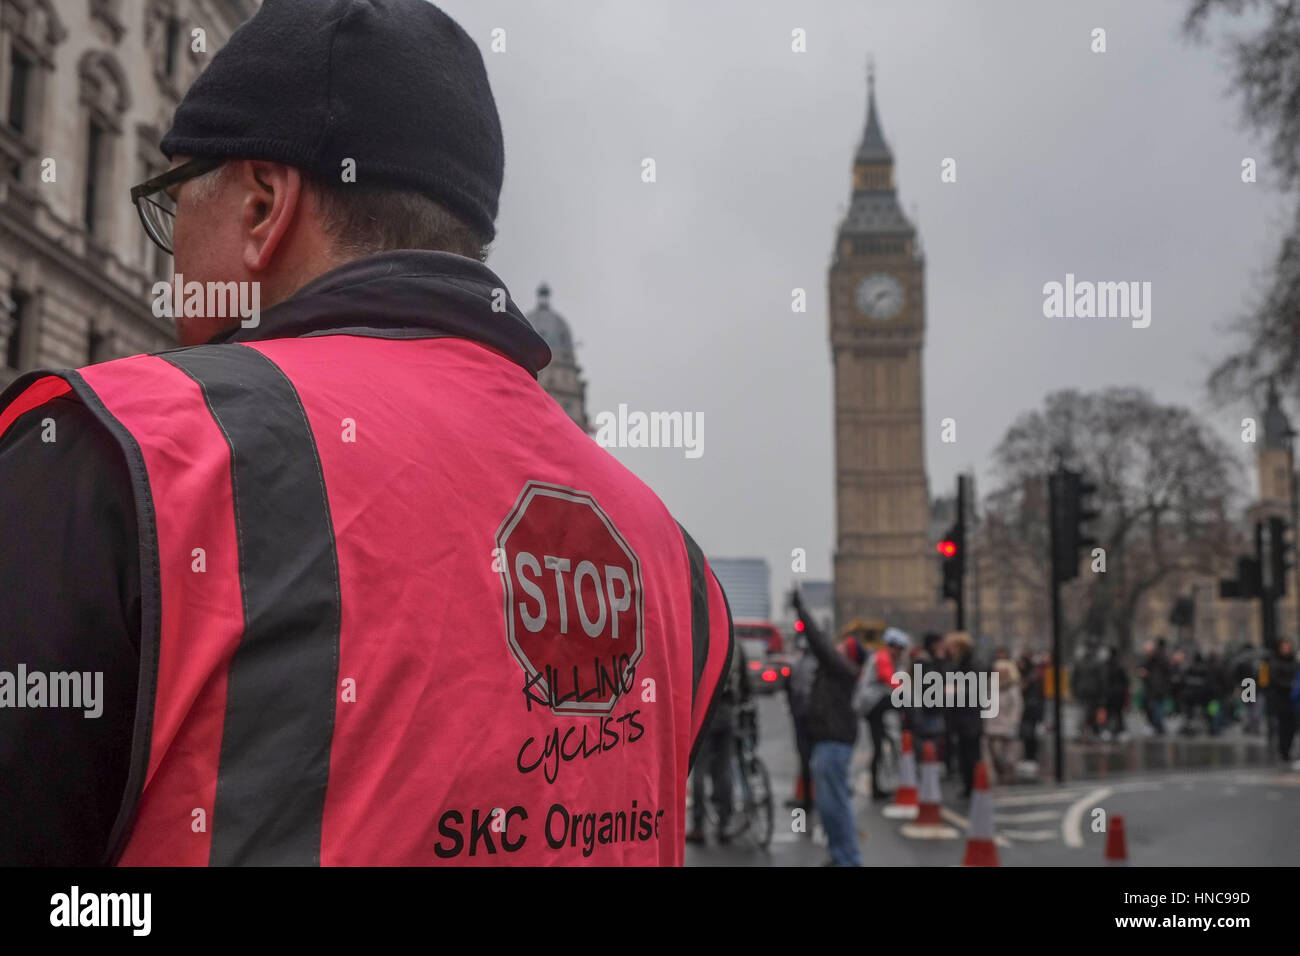 London, UK. 11th February 2017. Cyclist campaign group stage a   demo and 'Die In' outside the Treasury Office calling on the government to make roads safer  and  increase spending for Cycling by 10% by 2020. © claire doherty/Alamy Live News Stock Photo